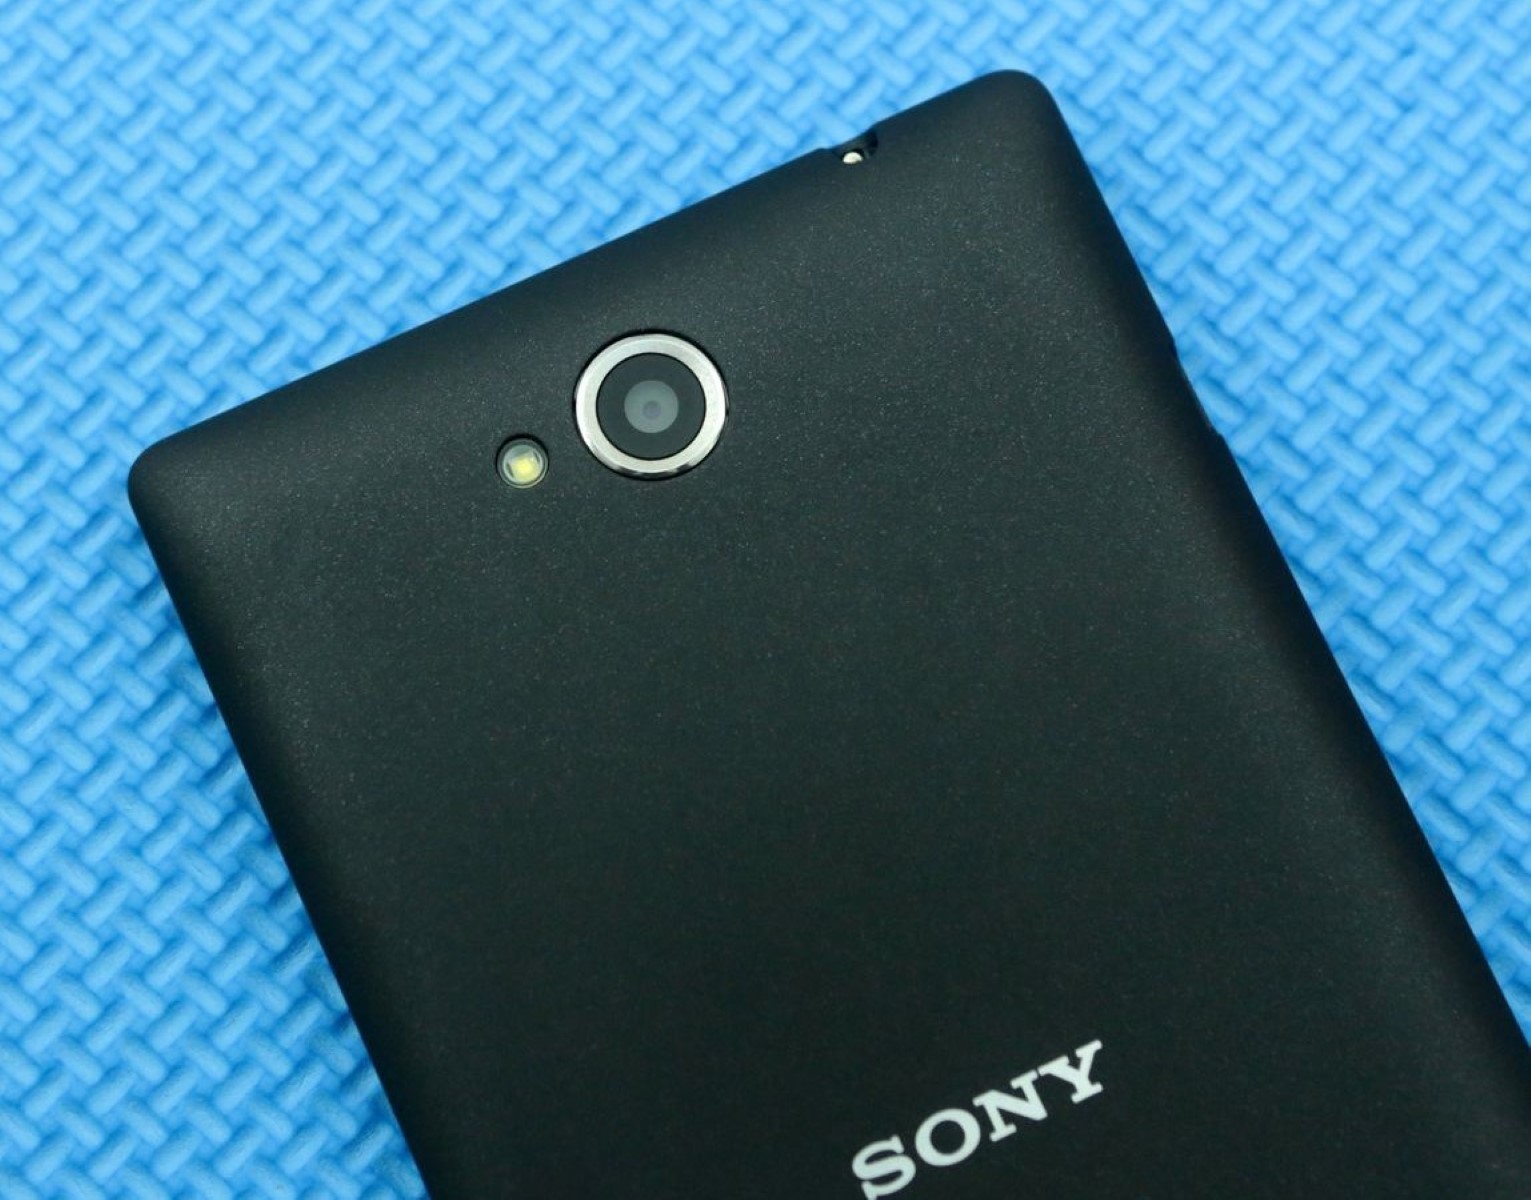 Sony Xperia C Manufacturing Country: All You Need To Know